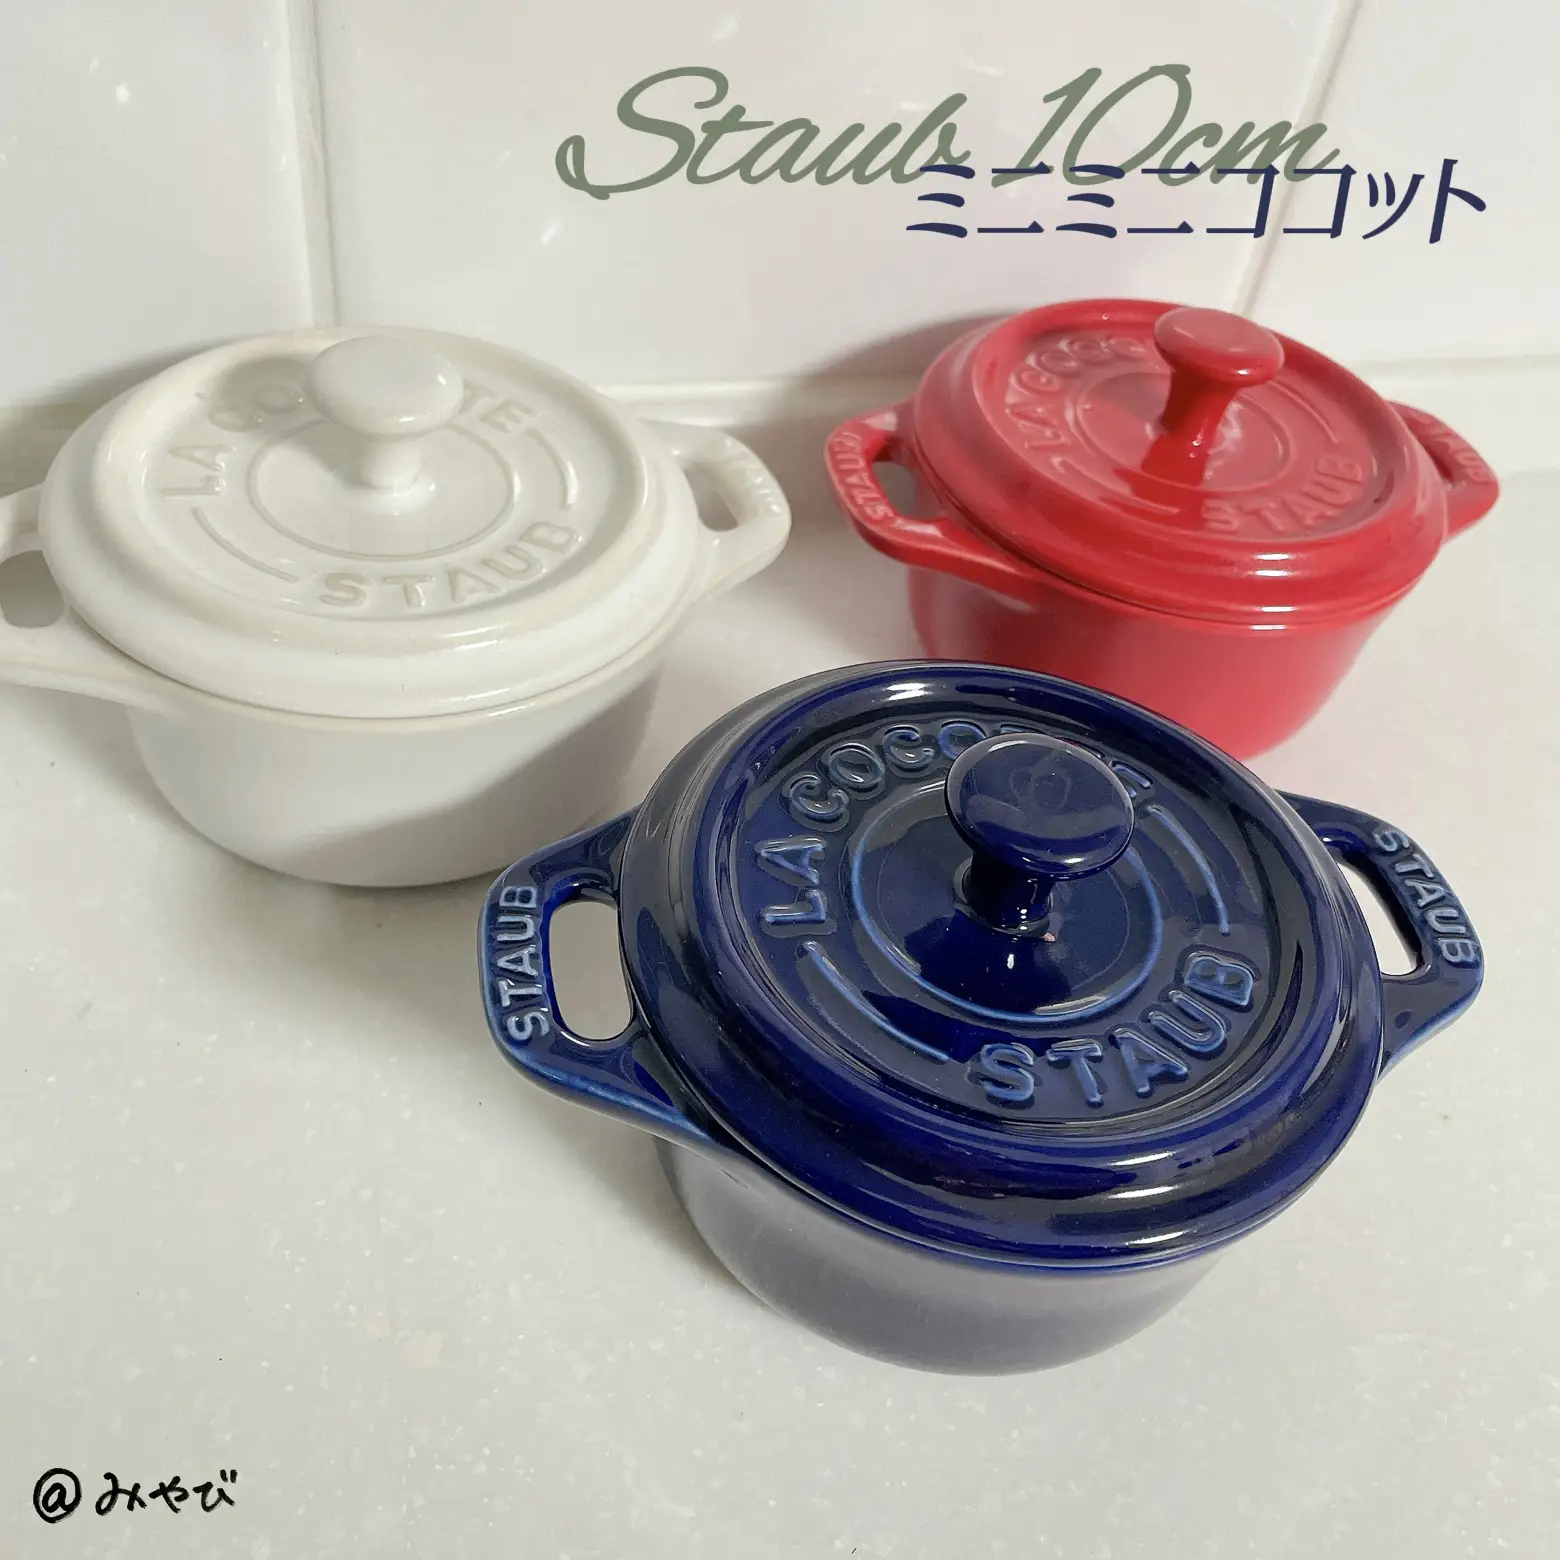 Staub pot 🇫🇷 mini size (10cm) is very cute   | Gallery posted by